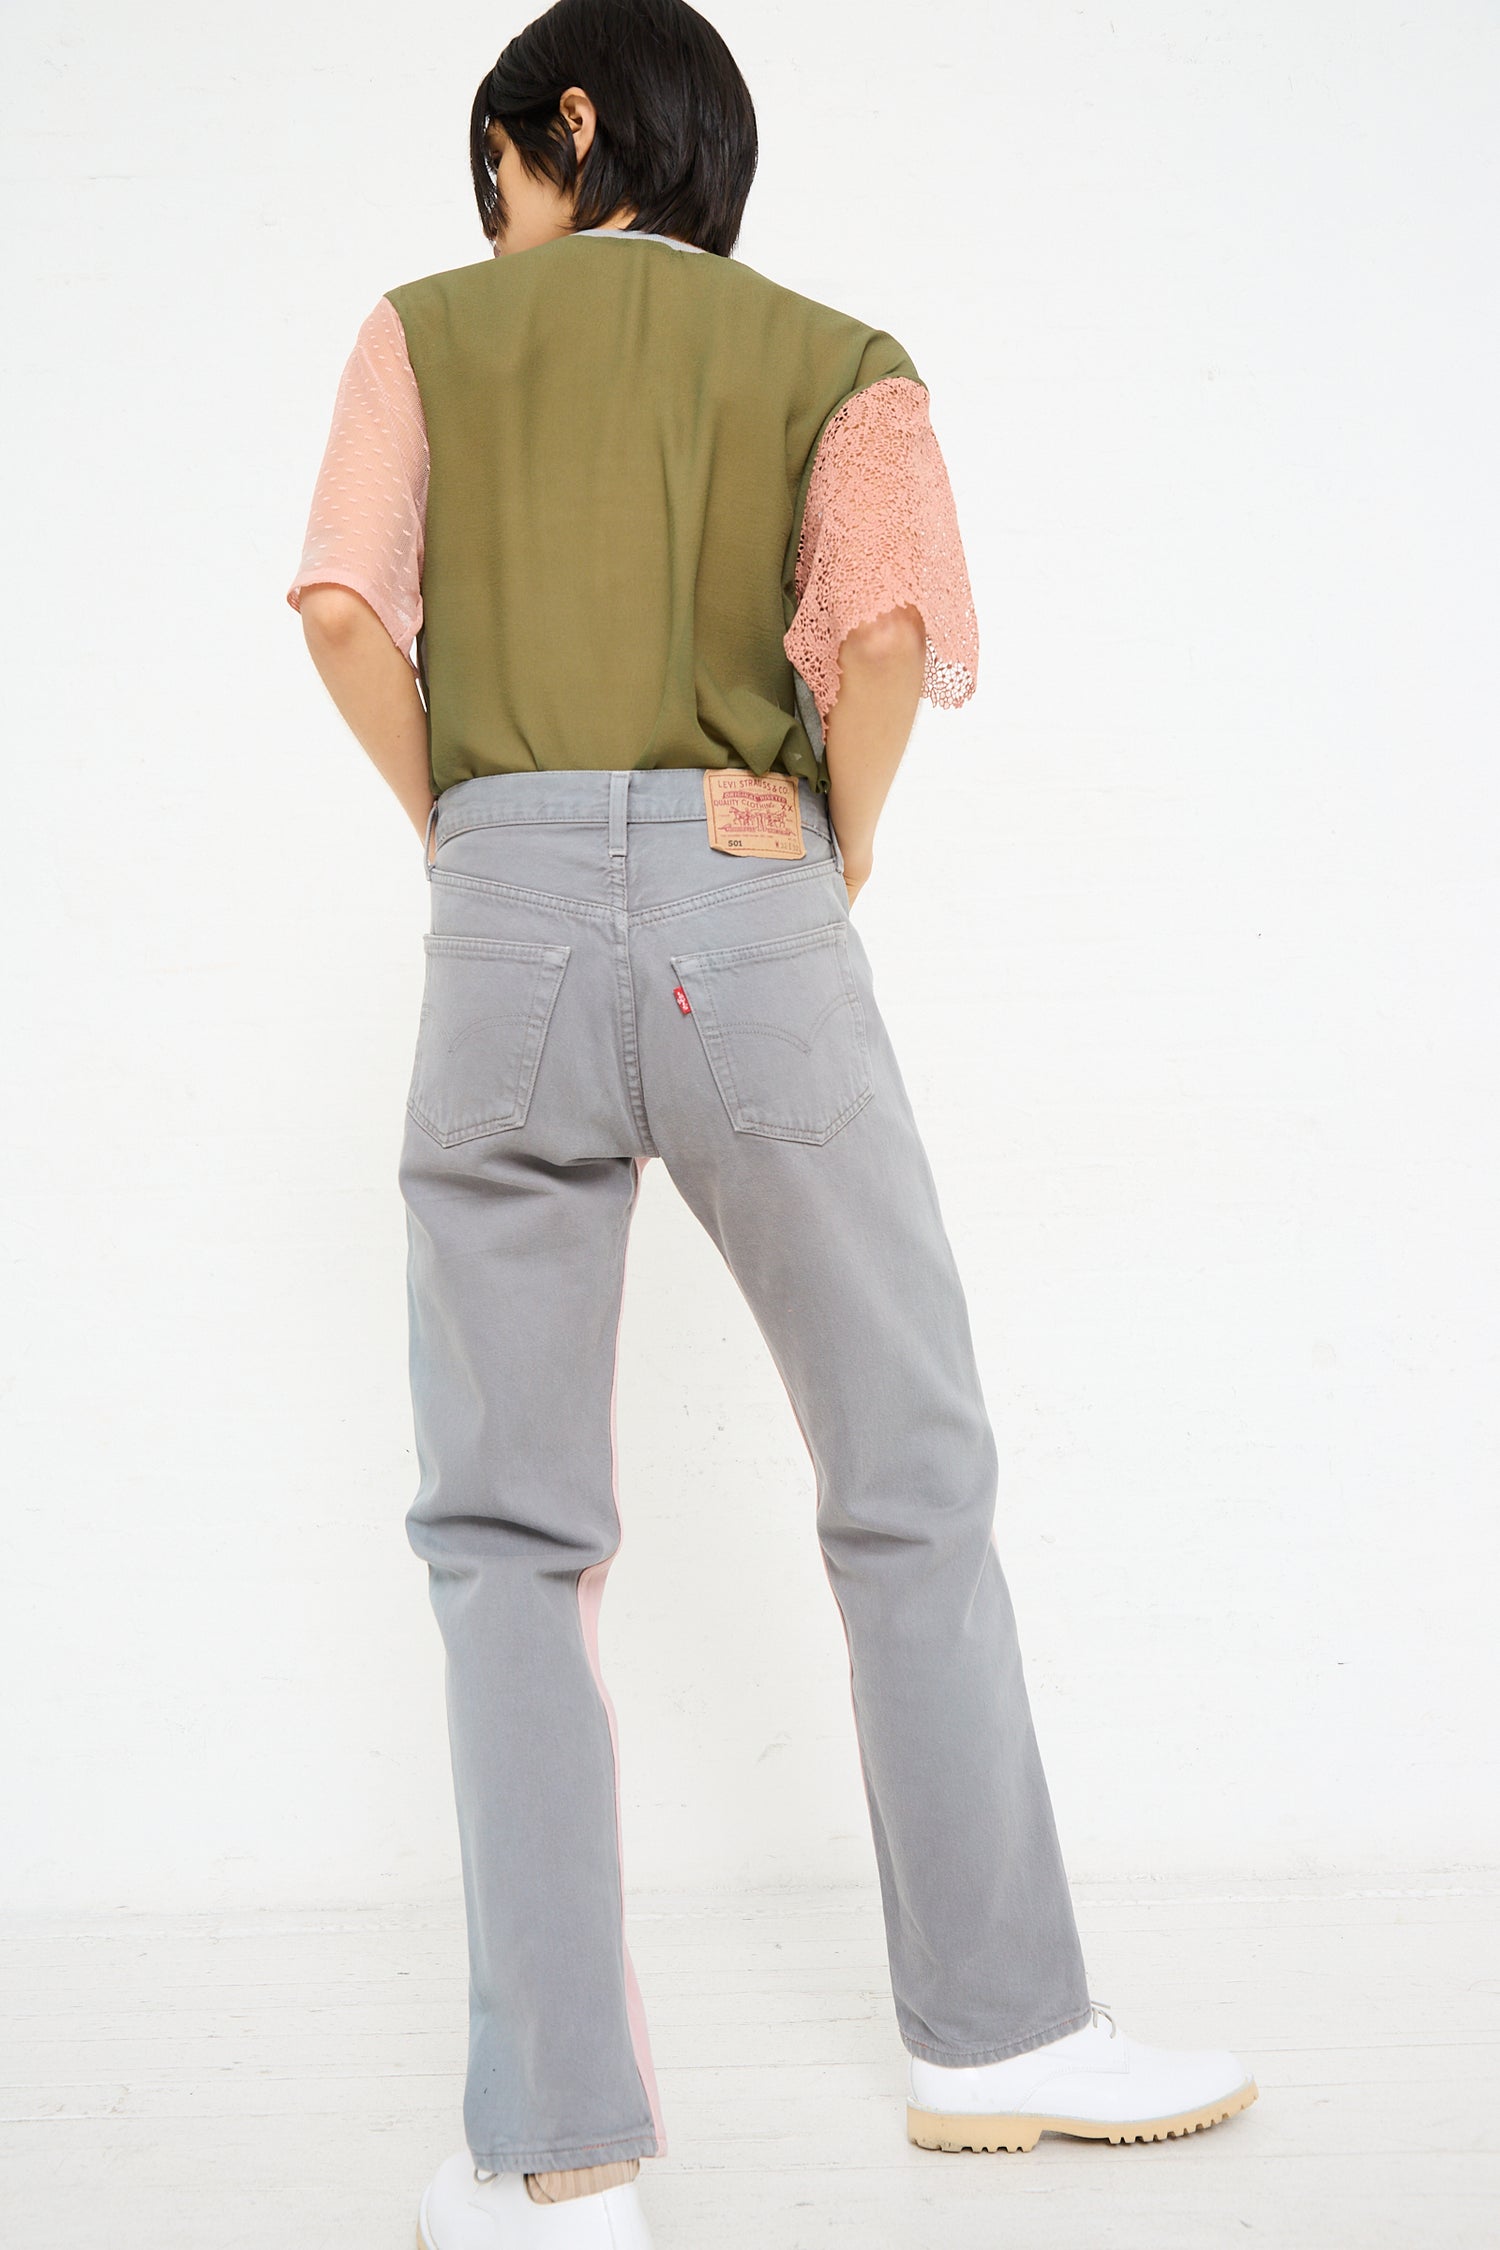 Woman from behind wearing Bless No. 73 Jeanspleatfront in Pink/Grey and a two-toned shirt with a pink sleeve detail.